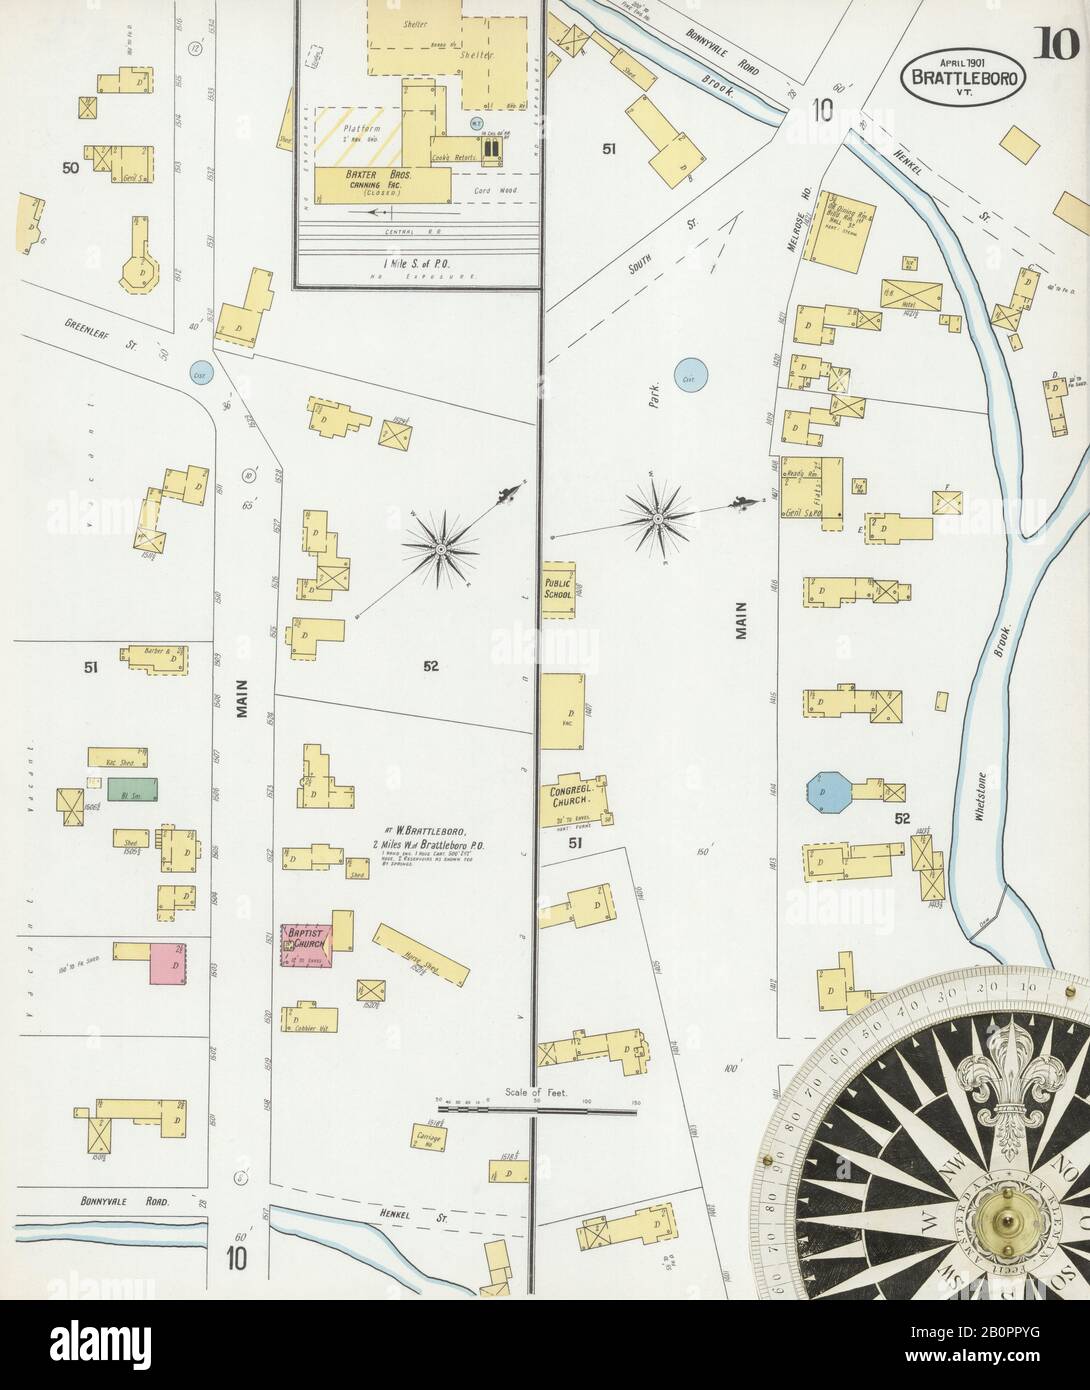 Image 10 of Sanborn Fire Insurance Map from Brattleboro, Windham County, Vermont. Apr 1901. 10 Sheet(s), America, street map with a Nineteenth Century compass Stock Photo